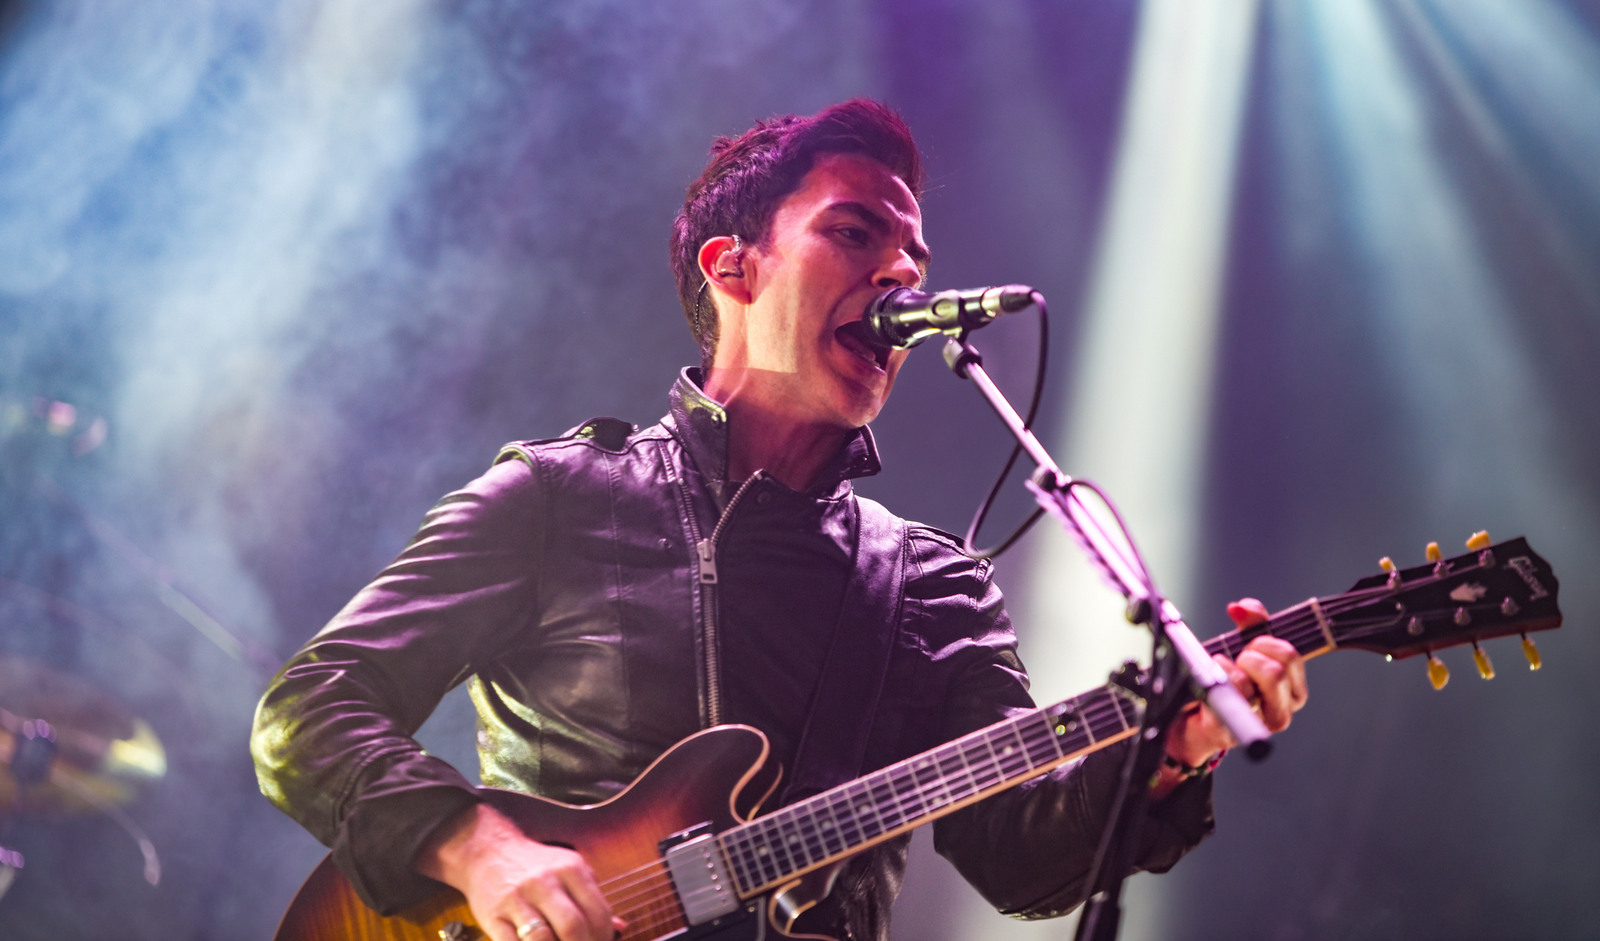 IN FOCUS// Stereophonics at Custom House Square, Wednesday 24th August 2022